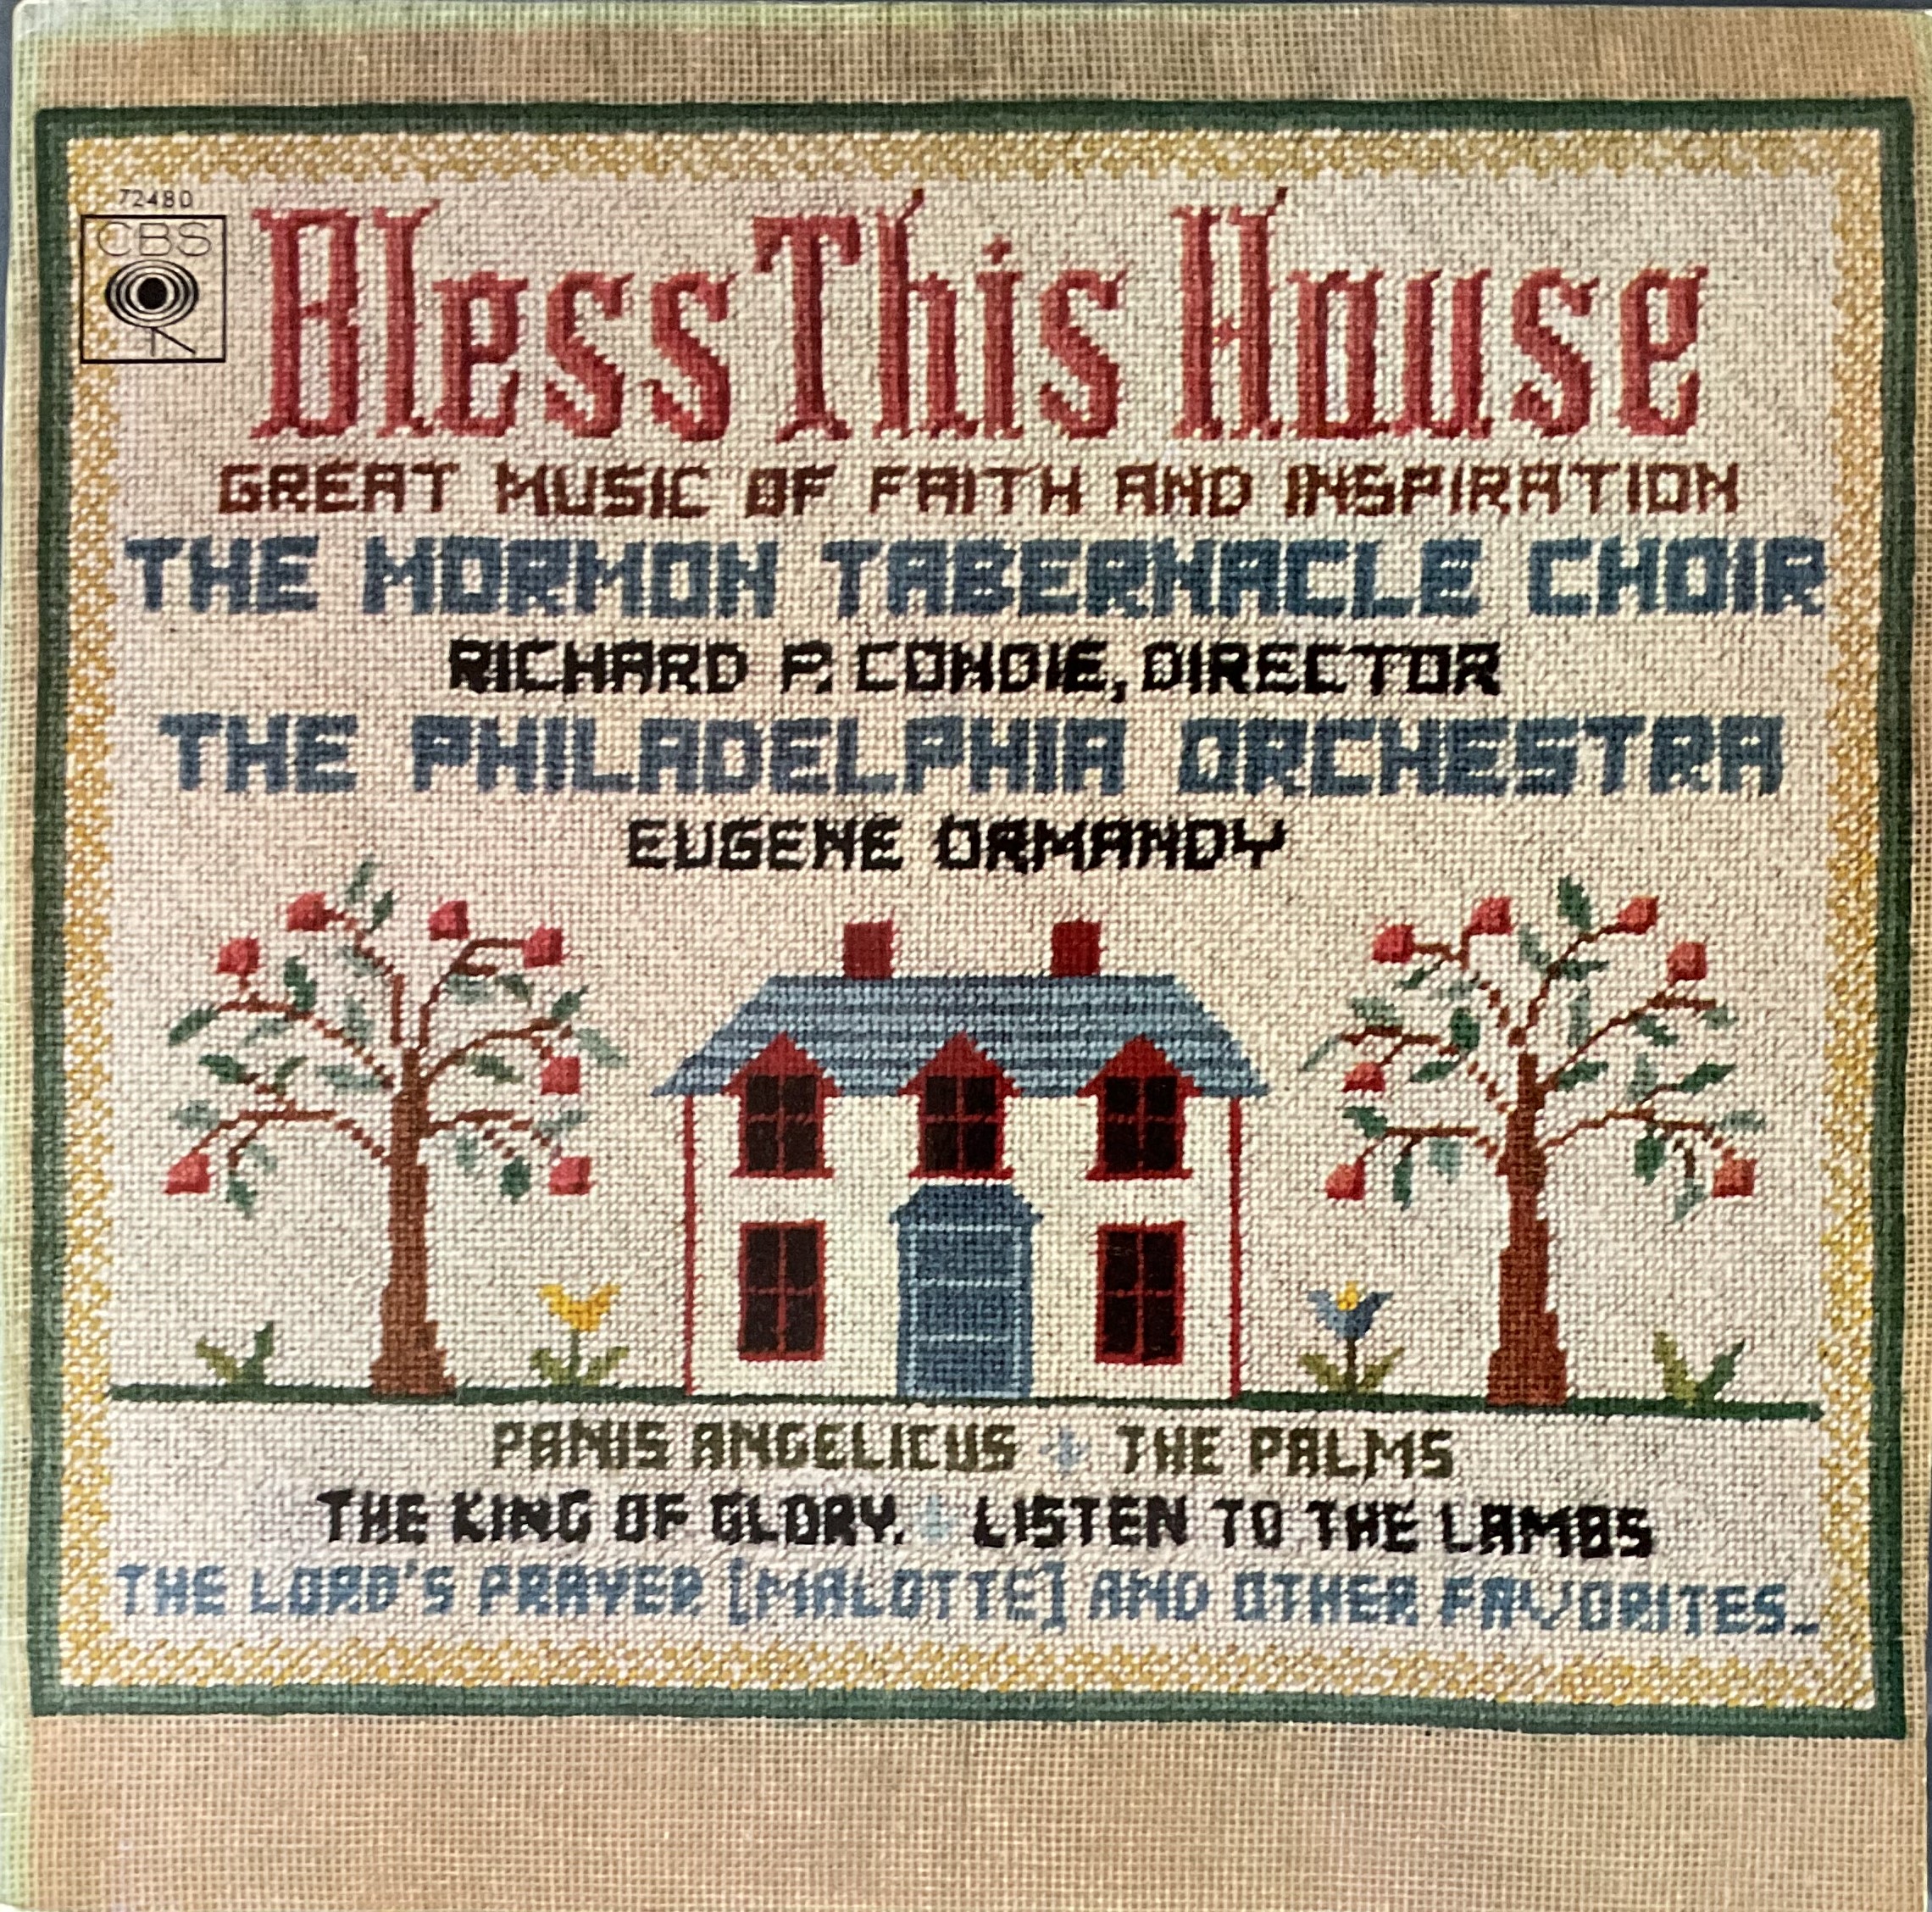 Bless This House Tv Series Signed Lp Back Cover By Diana Coupland (1928-2006), Sid James (1913-1976)